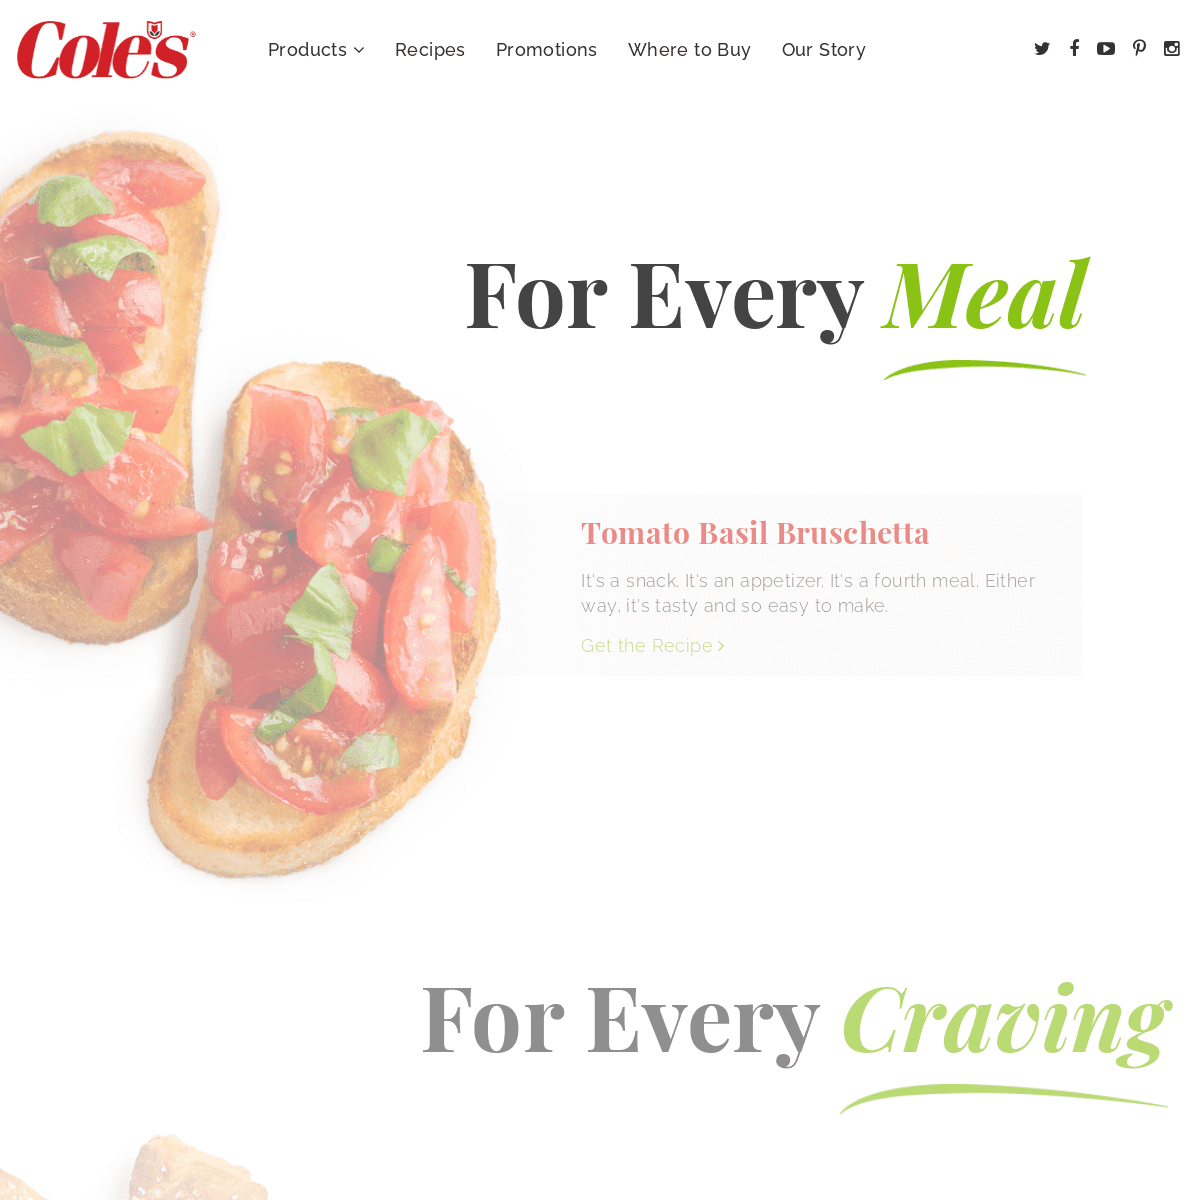 A complete backup of https://coles.com